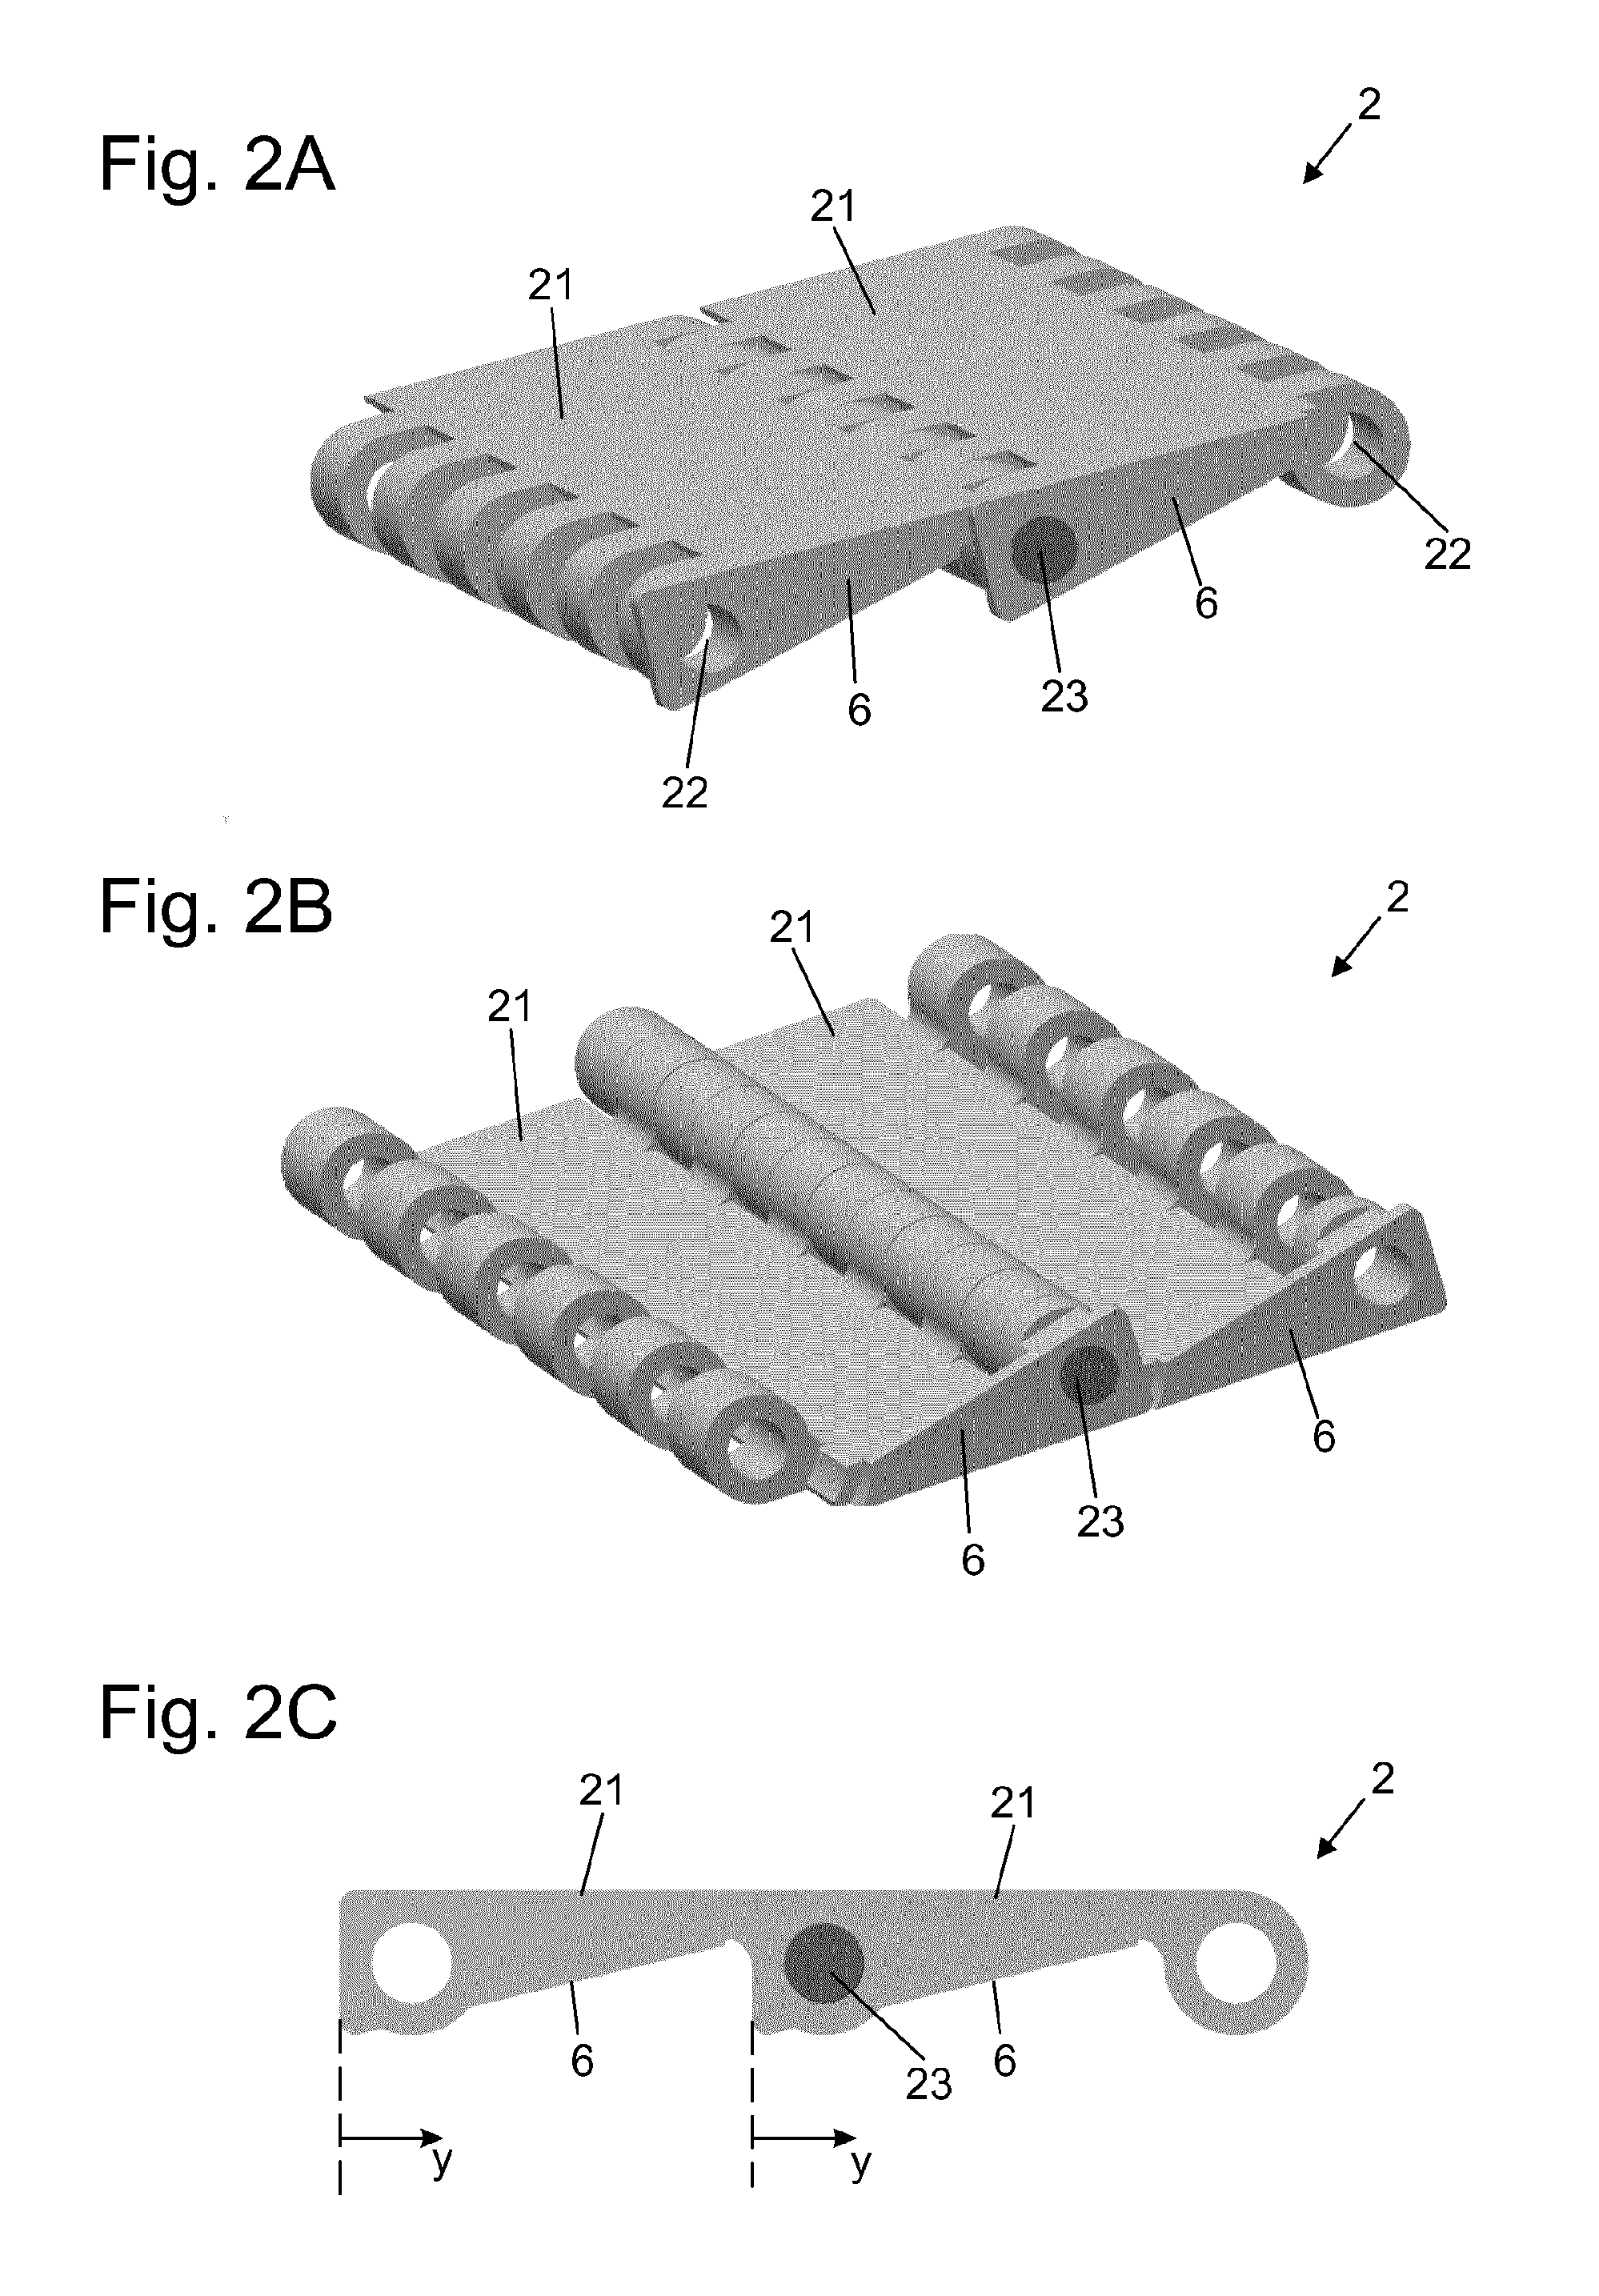 Method of operating a radiographic inspection system with a modular conveyor chain